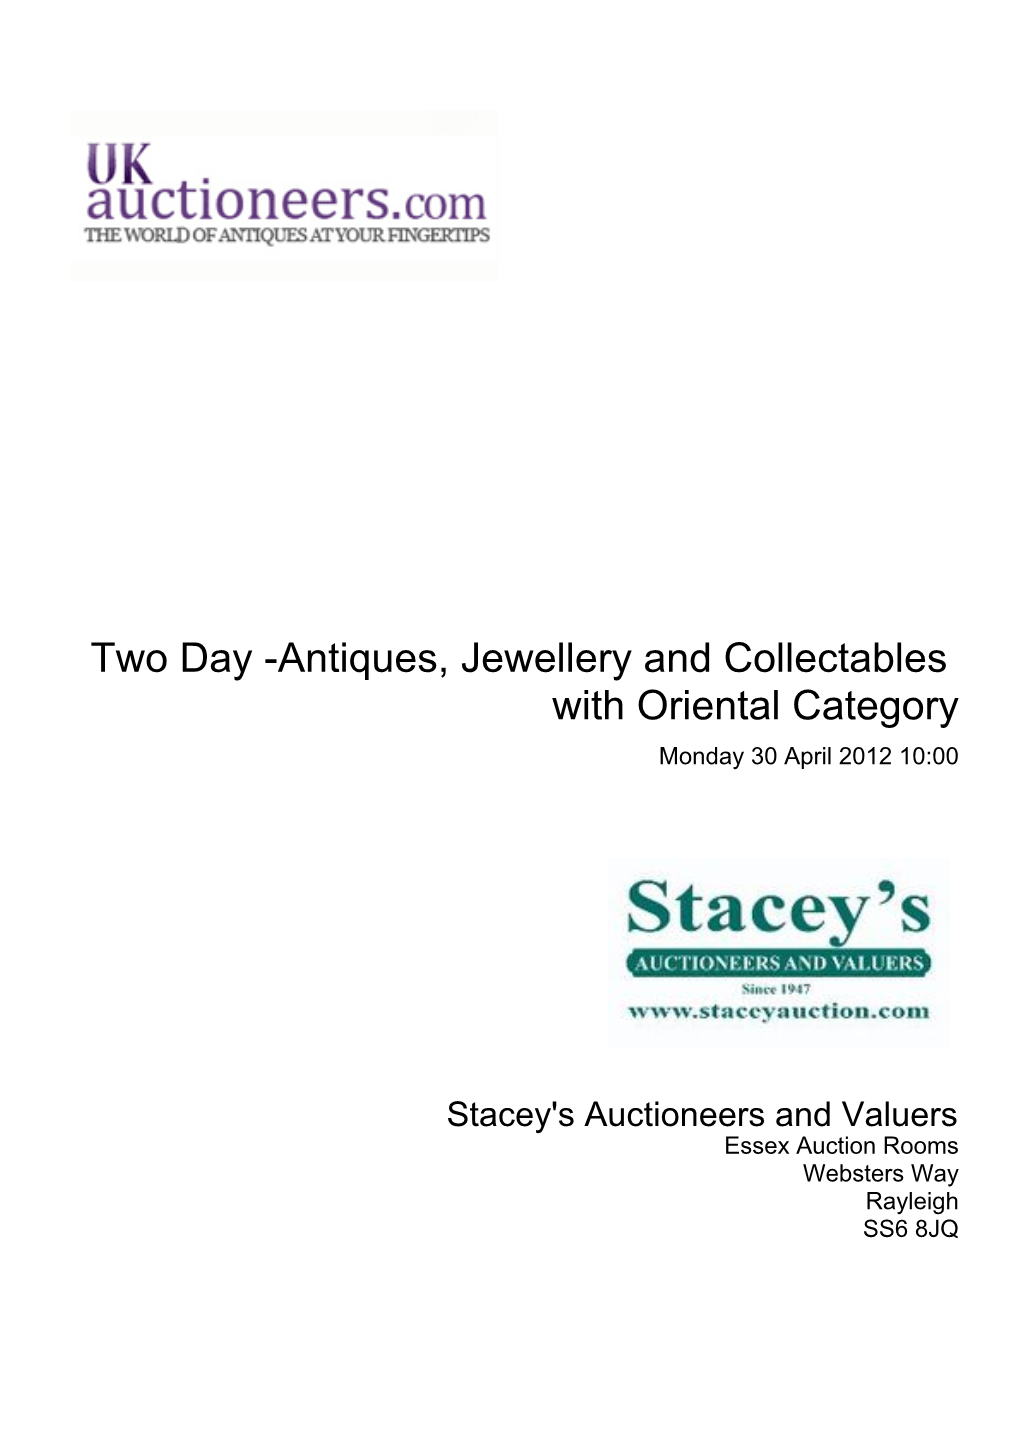 Antiques, Jewellery and Collectables with Oriental Category Monday 30 April 2012 10:00